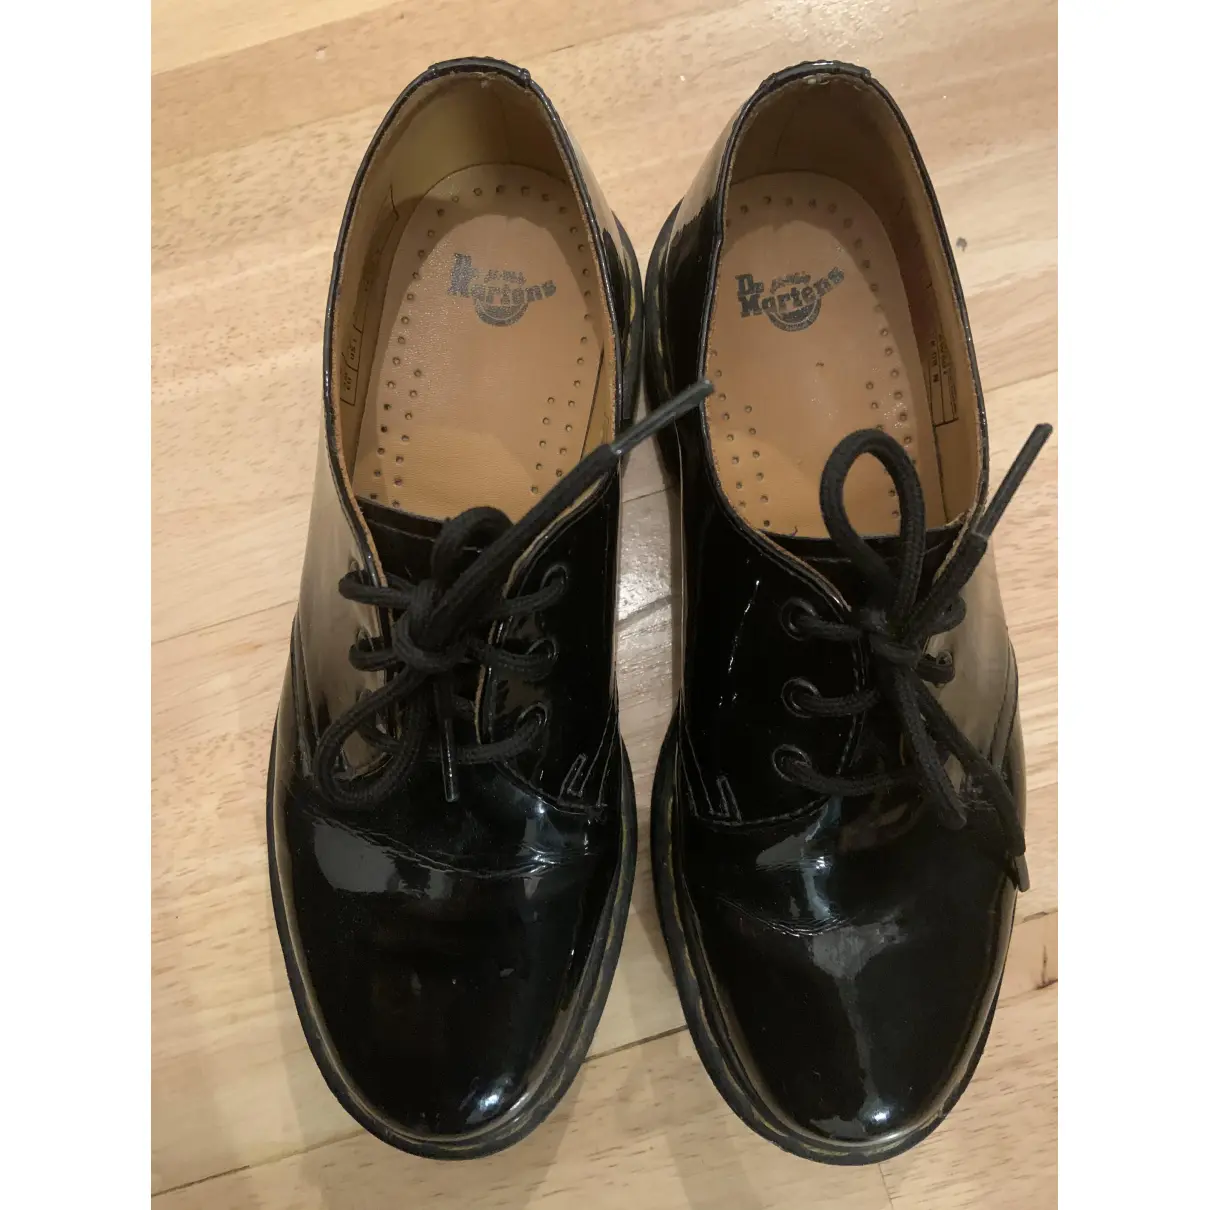 Buy Dr. Martens Patent leather lace ups online